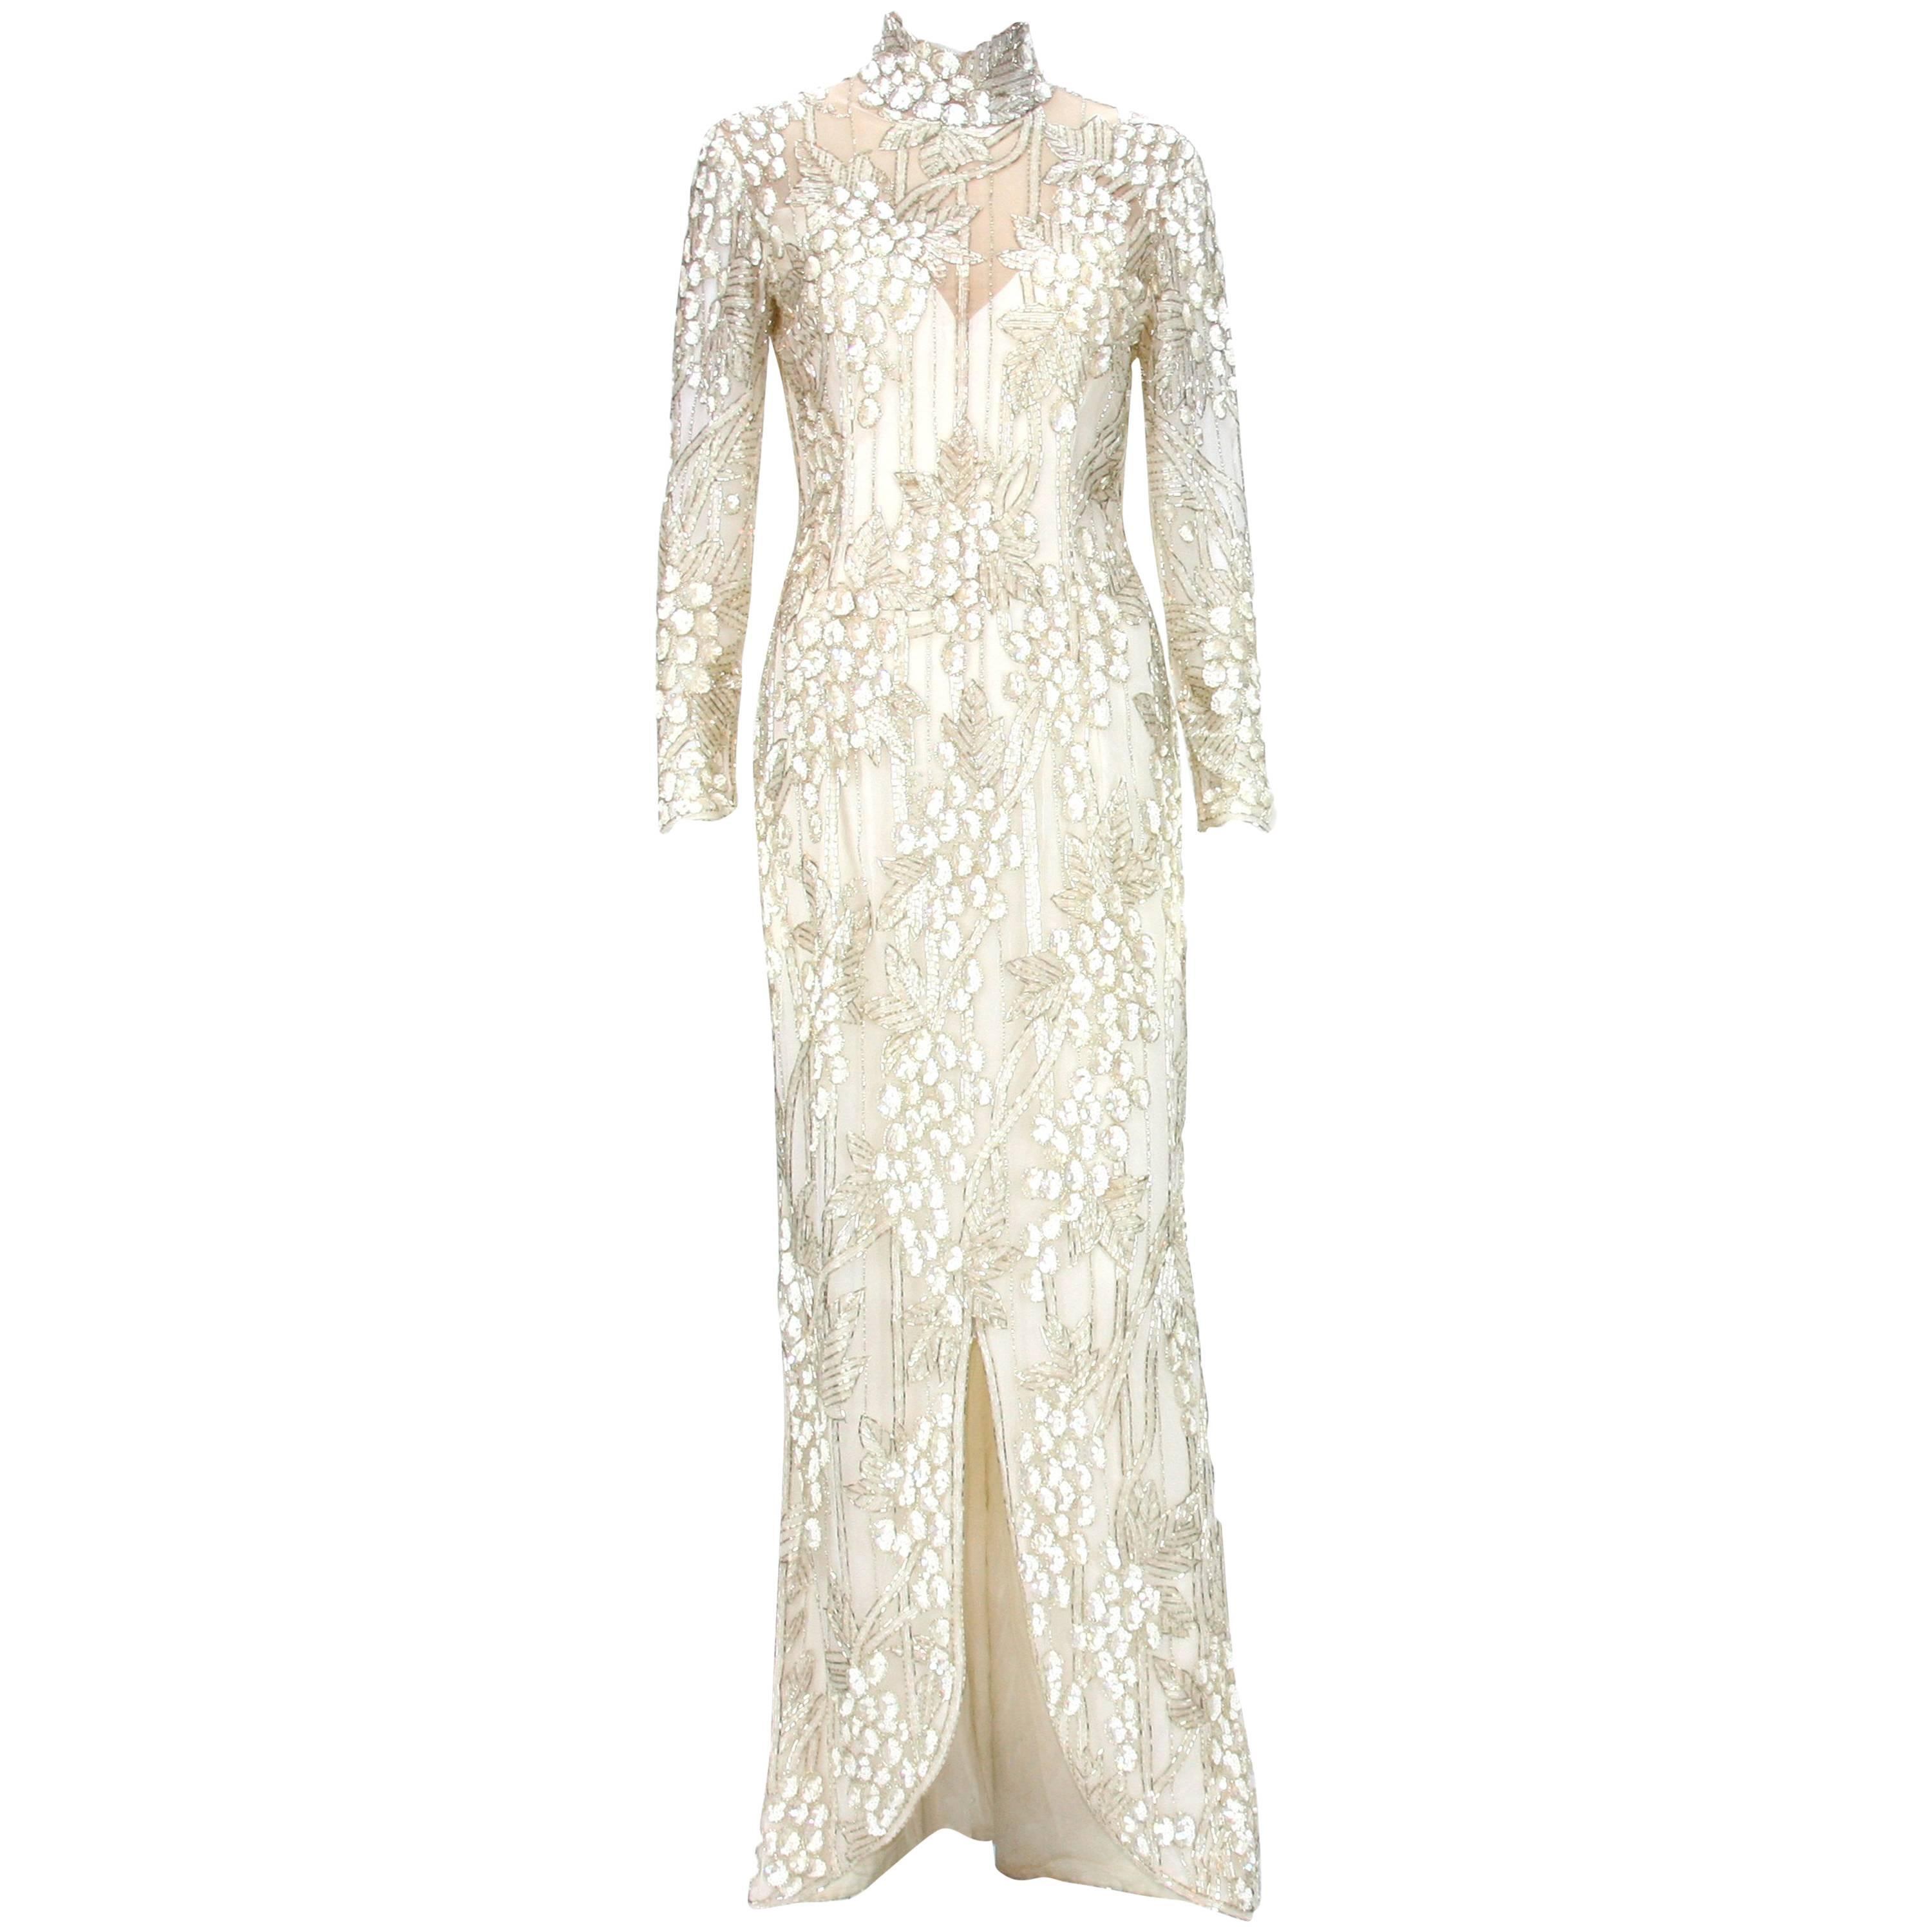 Iconic 1989 Bob Mackie White Embroidered Beaded Grapevine Design Gown For Sale